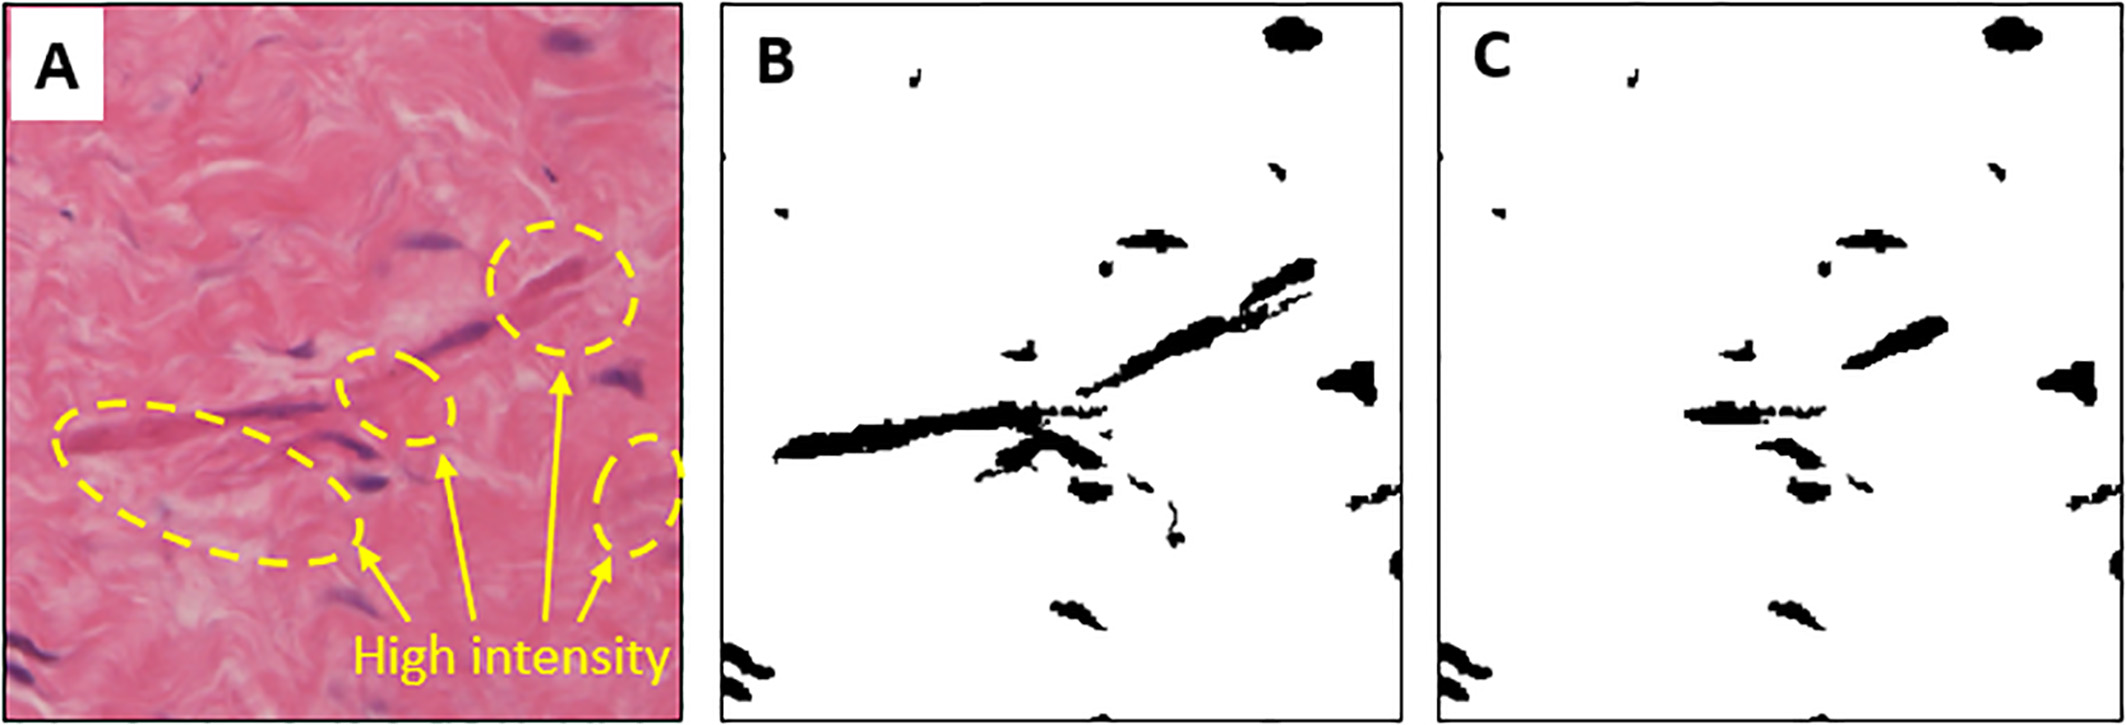 Results of Gaussian-weighted image and comparison of cell extraction. (A) is a raw-colored image with high-intensity tissue regions. (B) is the result of recognition of tissue as a cell by high-intensity tissue regions. (C) shows the error correction by the Gaussian-weighted method.